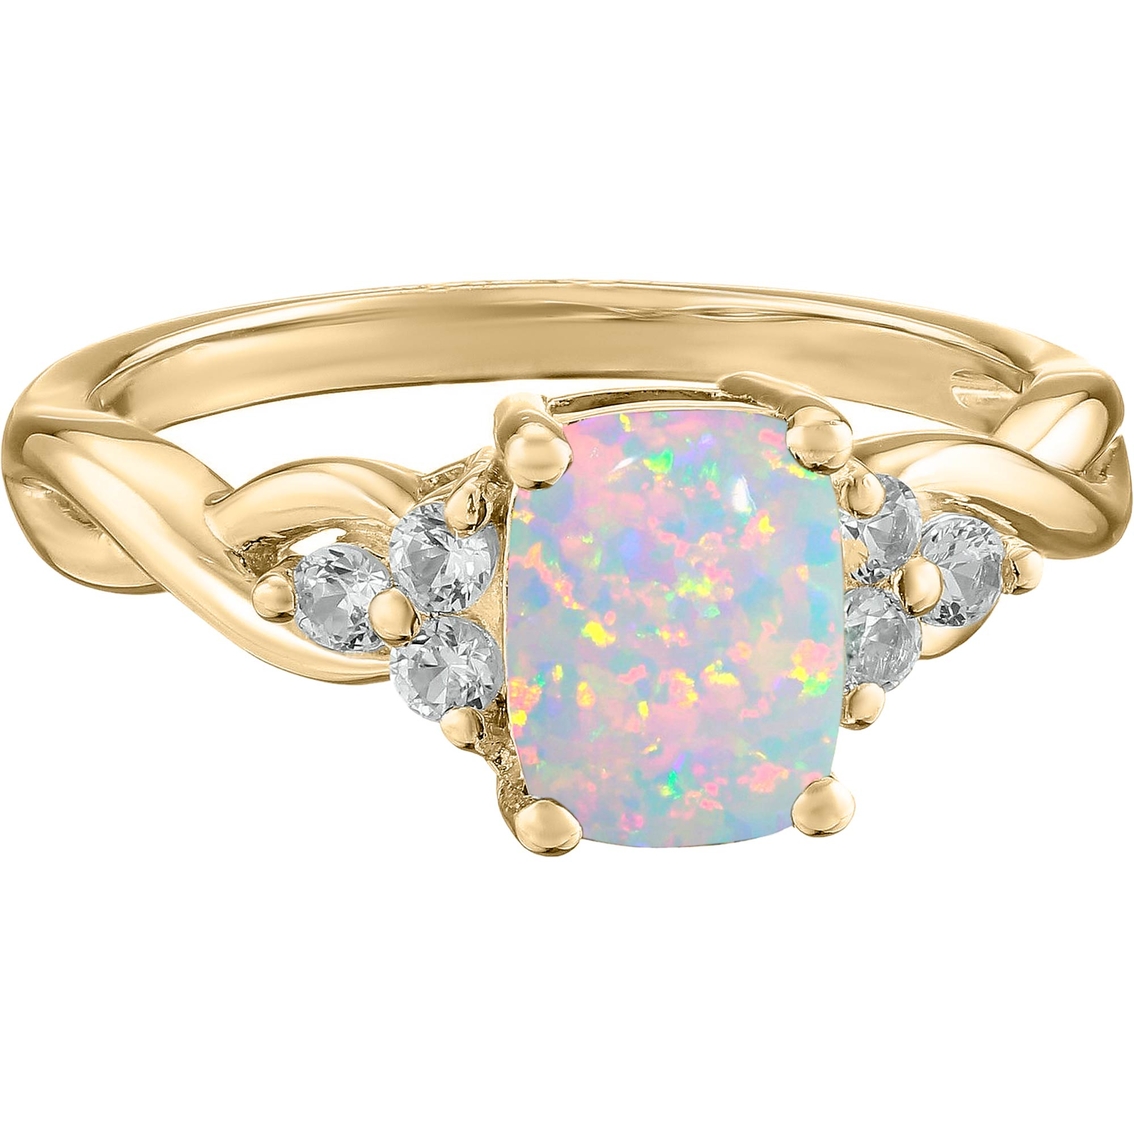 10K Yellow Gold Created Opal and White topaz Ring - Image 2 of 3